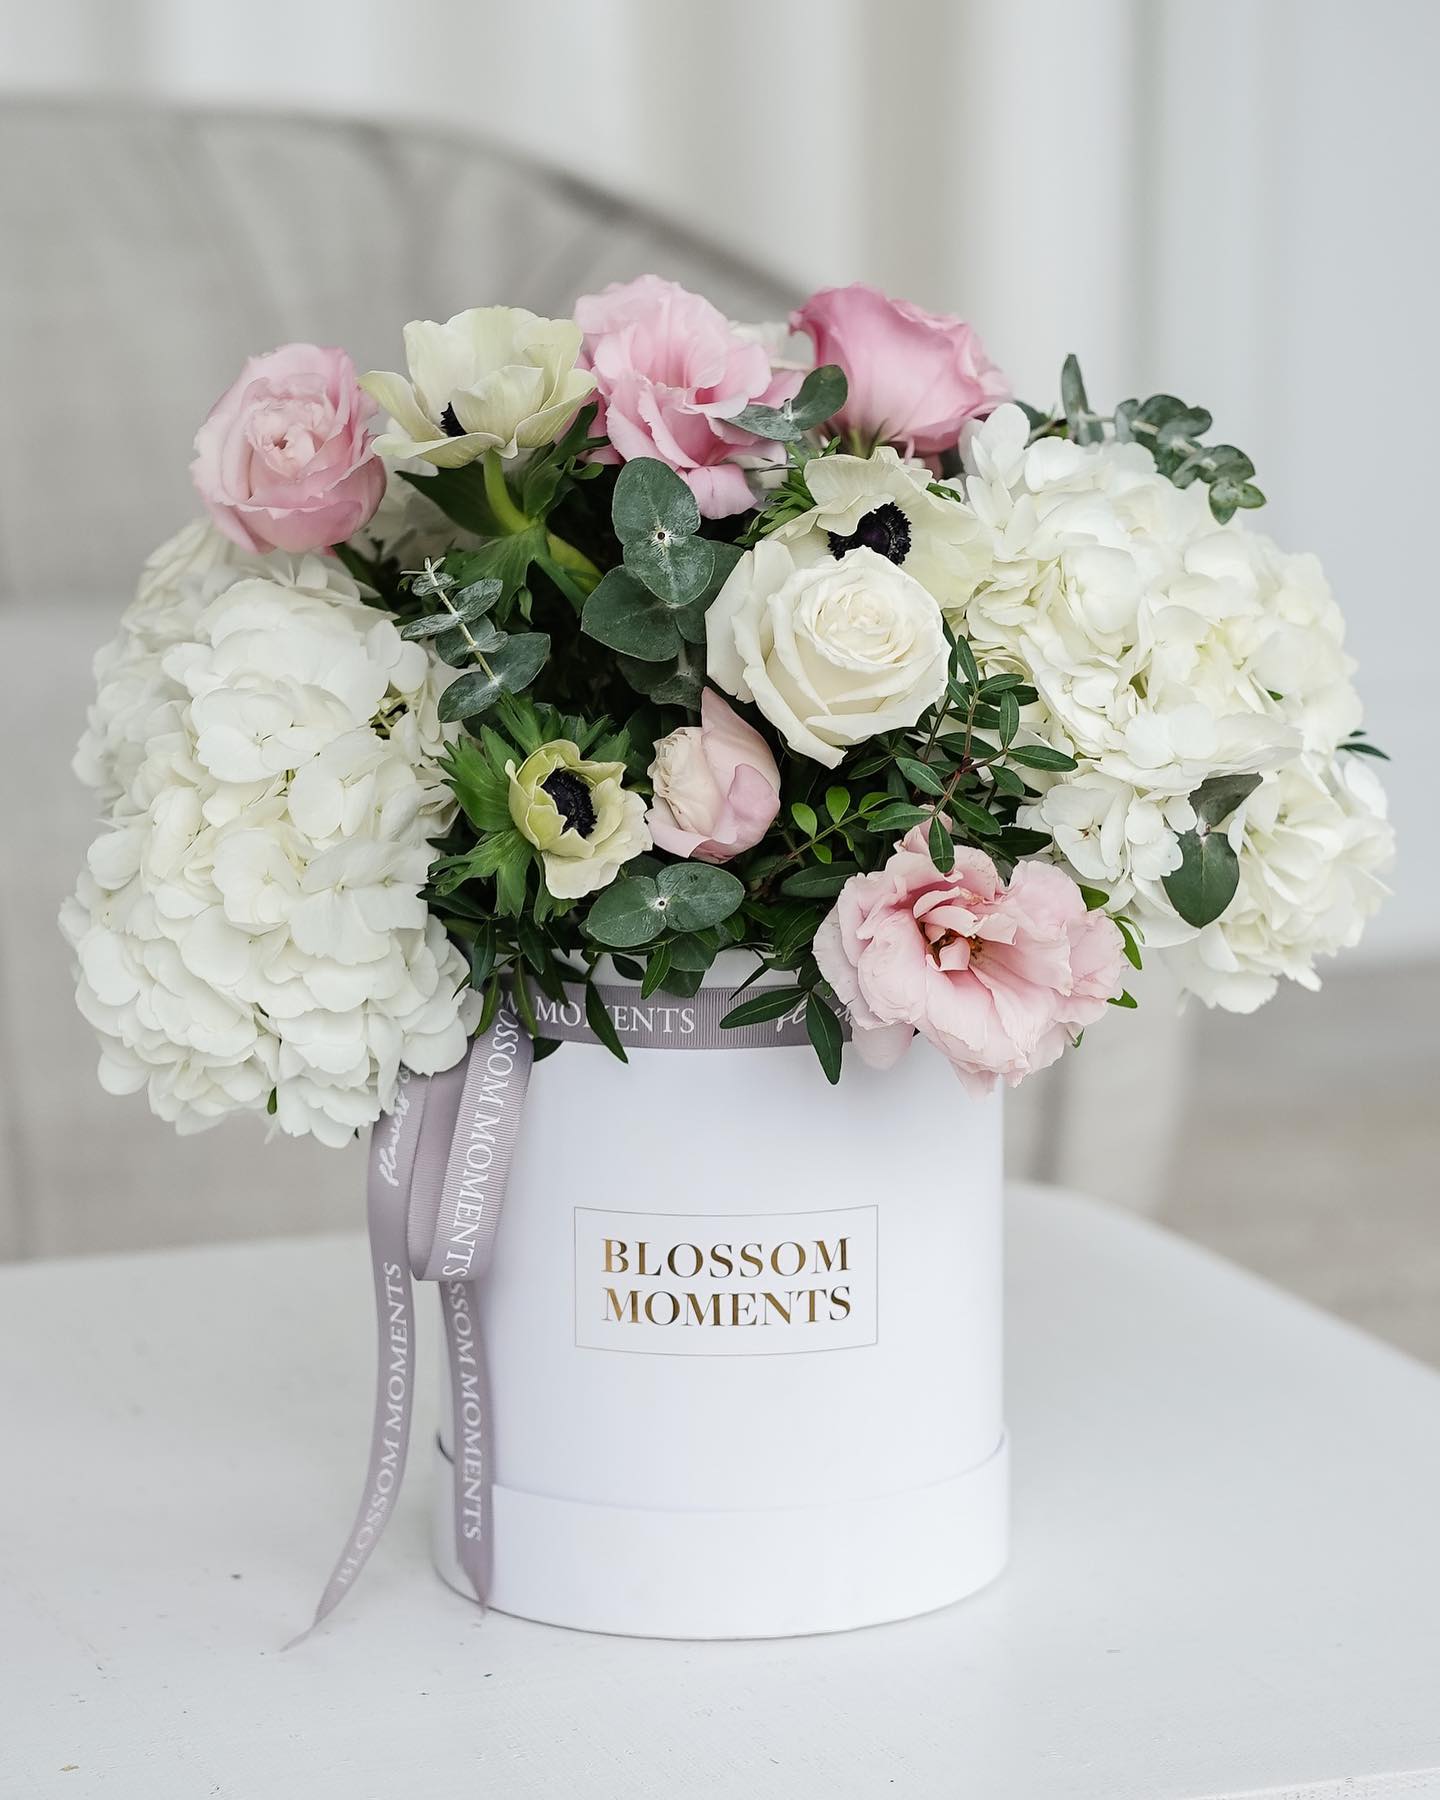 A light pink and white flower arrangement in a container that says Blossom Moments.